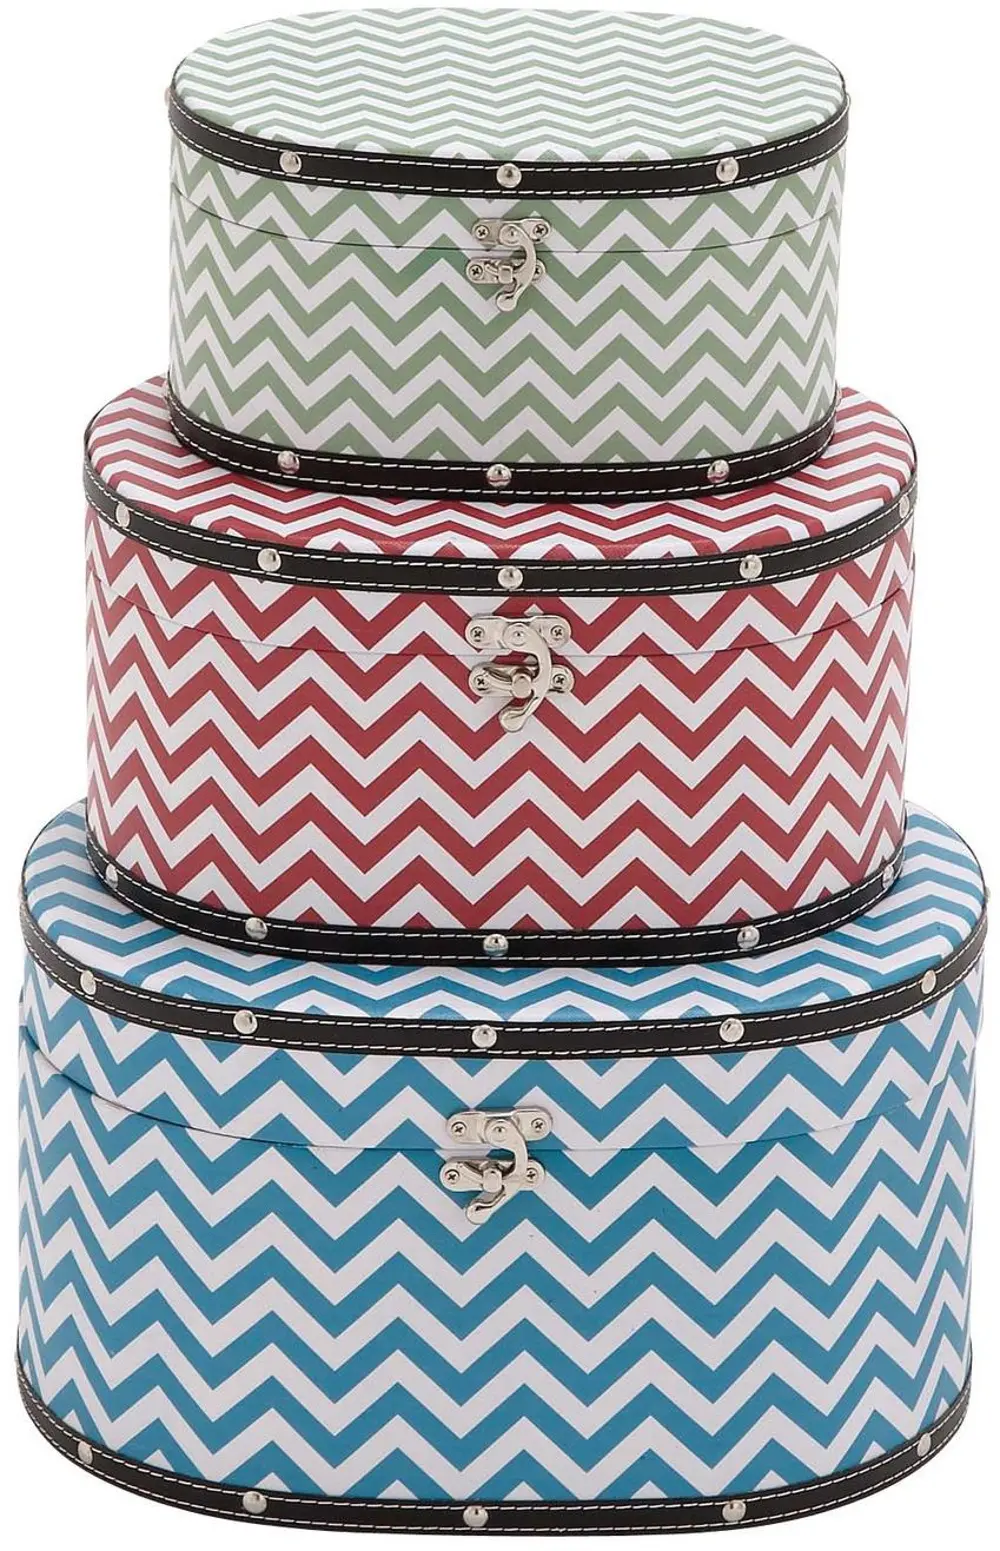 10 Inch Round Wood and Vinyl Chevron Patterned Box-1